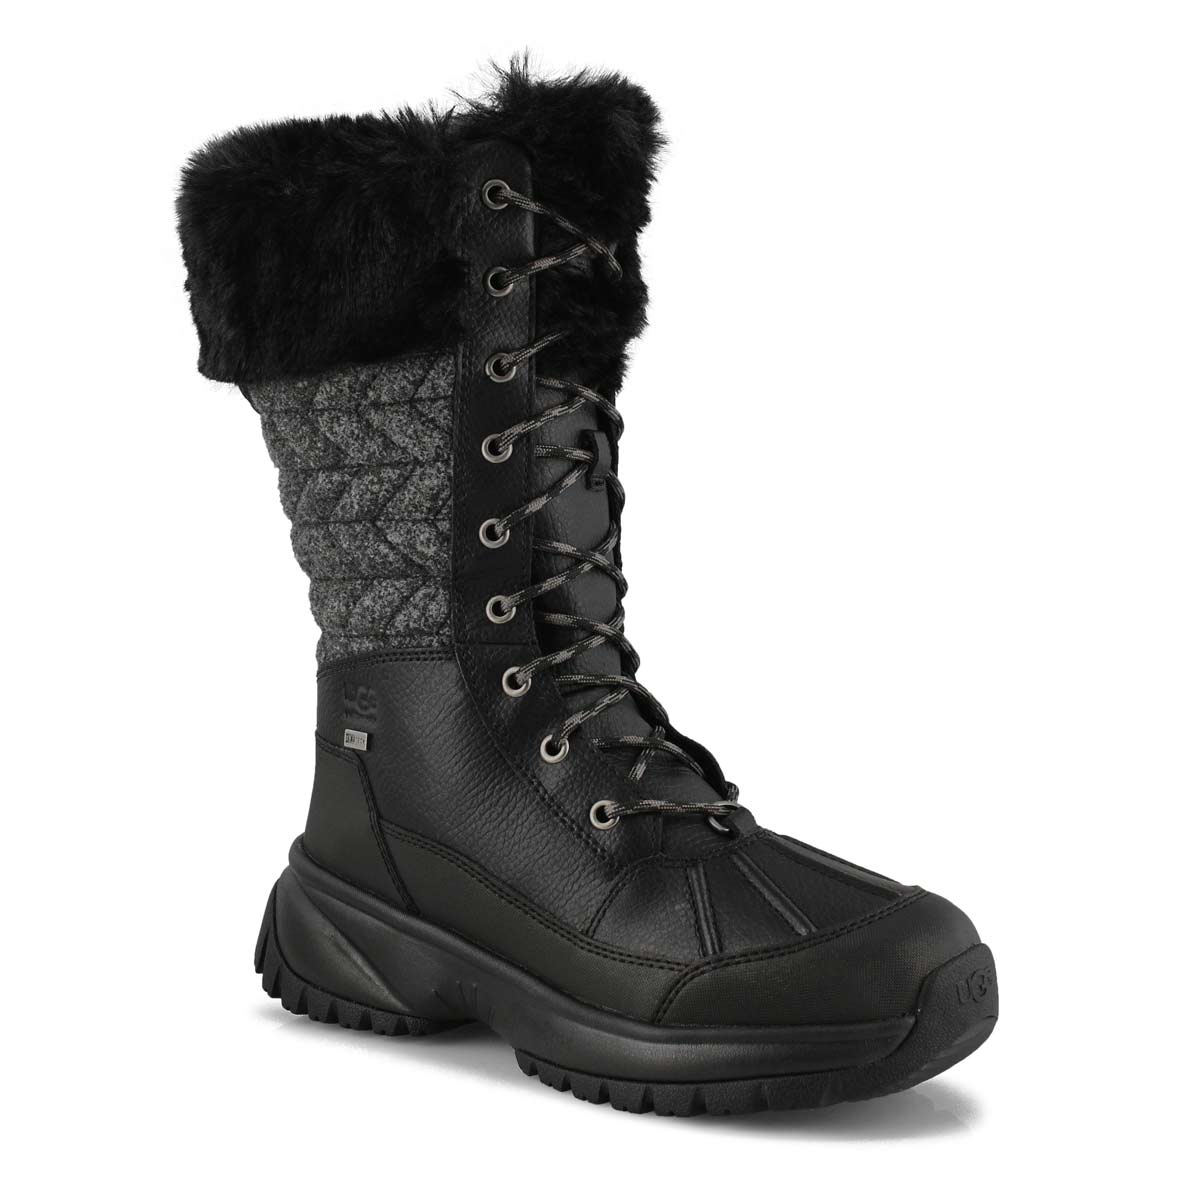 Buy > women tall ugg boots > in stock